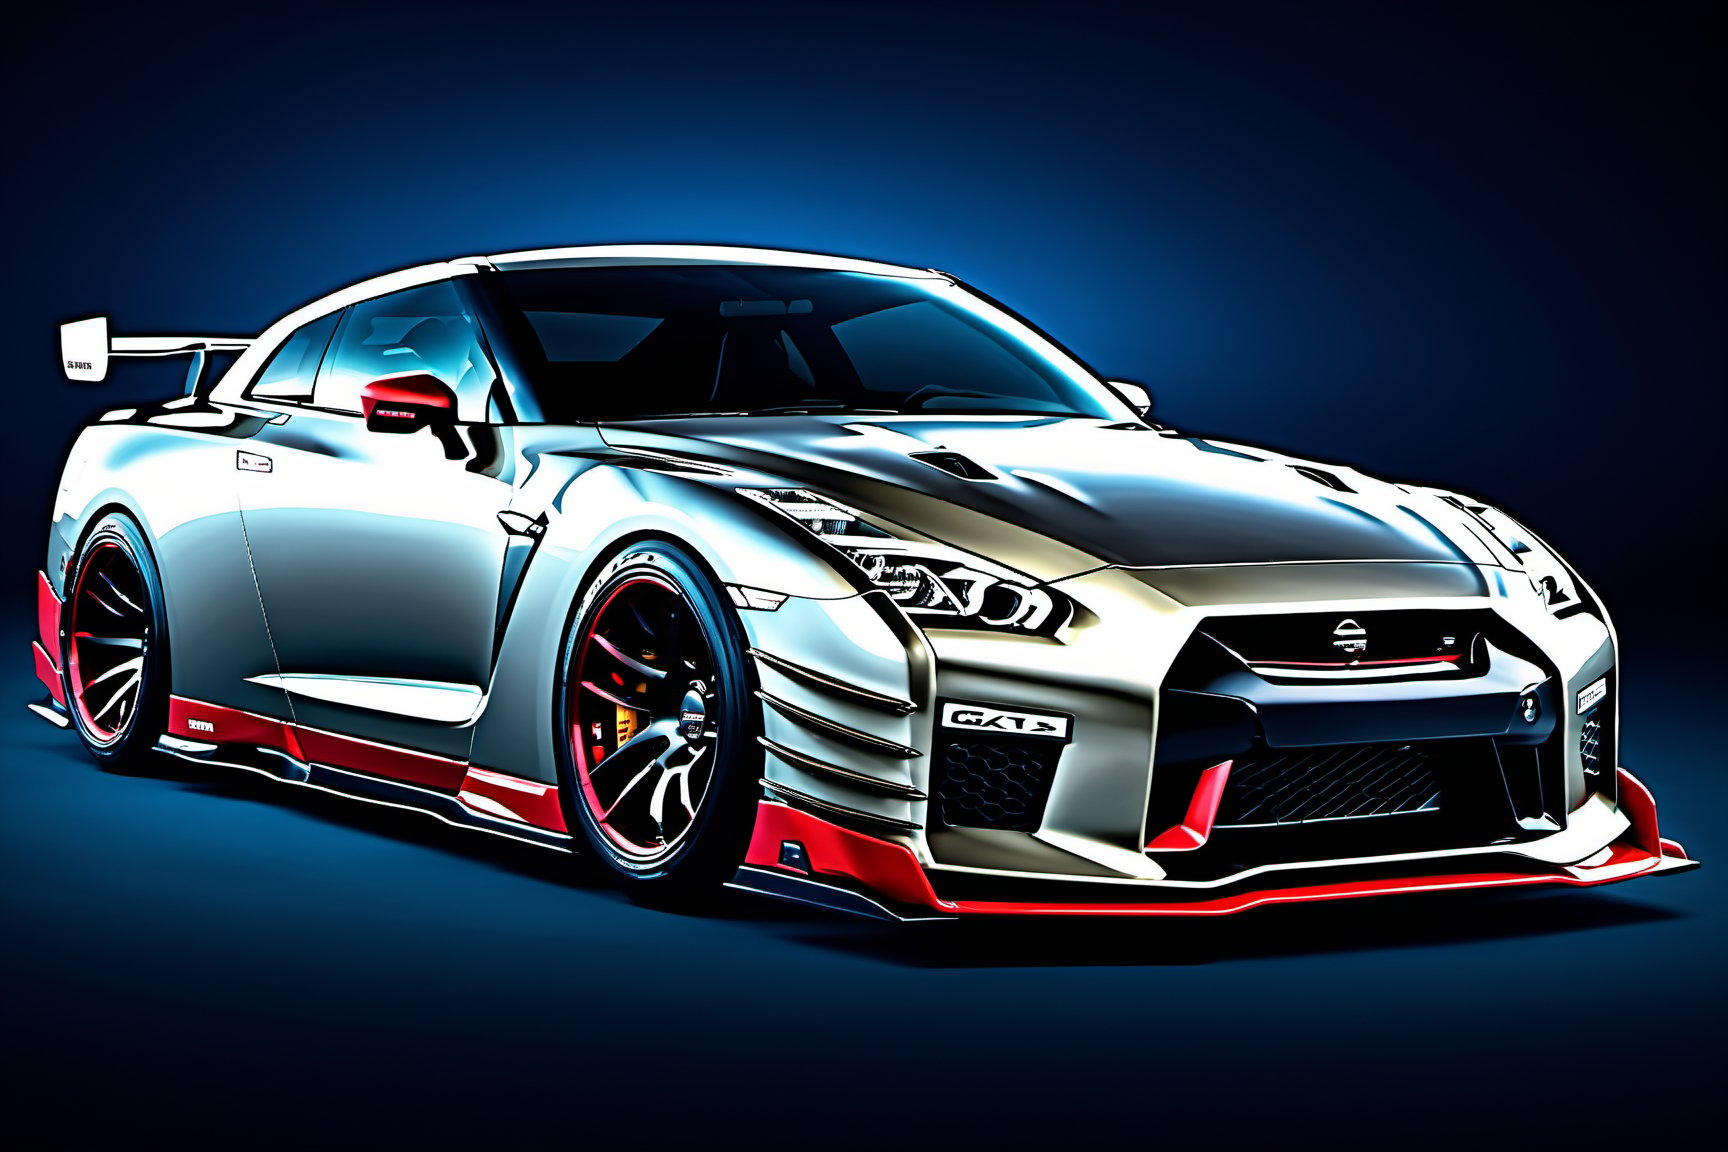 (((A photo realistic image of a Nissan GT-R Nismo))), ((wide shot)) , sharp, detailed car body , detailed tires, (masterpiece, best quality, ultra-detailed, 8K), race car, street racing-inspired, Drifting inspired, LED, ((Twin headlights)), (((Bright neon color racing stripes))), (Black racing wheels), Wheel spin showing motion, Show car in motion, Burnout,  wide body kit, modified car,  racing livery, masterpiece, best quality, realistic, ultra high res, (((depth of field))), (full dual color neon lights:1.2), (hard dual color lighting:1.4), (detailed background), (masterpiece:1.2), (ultra detailed), (best quality), intricate, comprehensive cinematic, magical photography, (gradients), glossy, Fast action style, Sideways drifting in to a turns, ,c_car,fire element